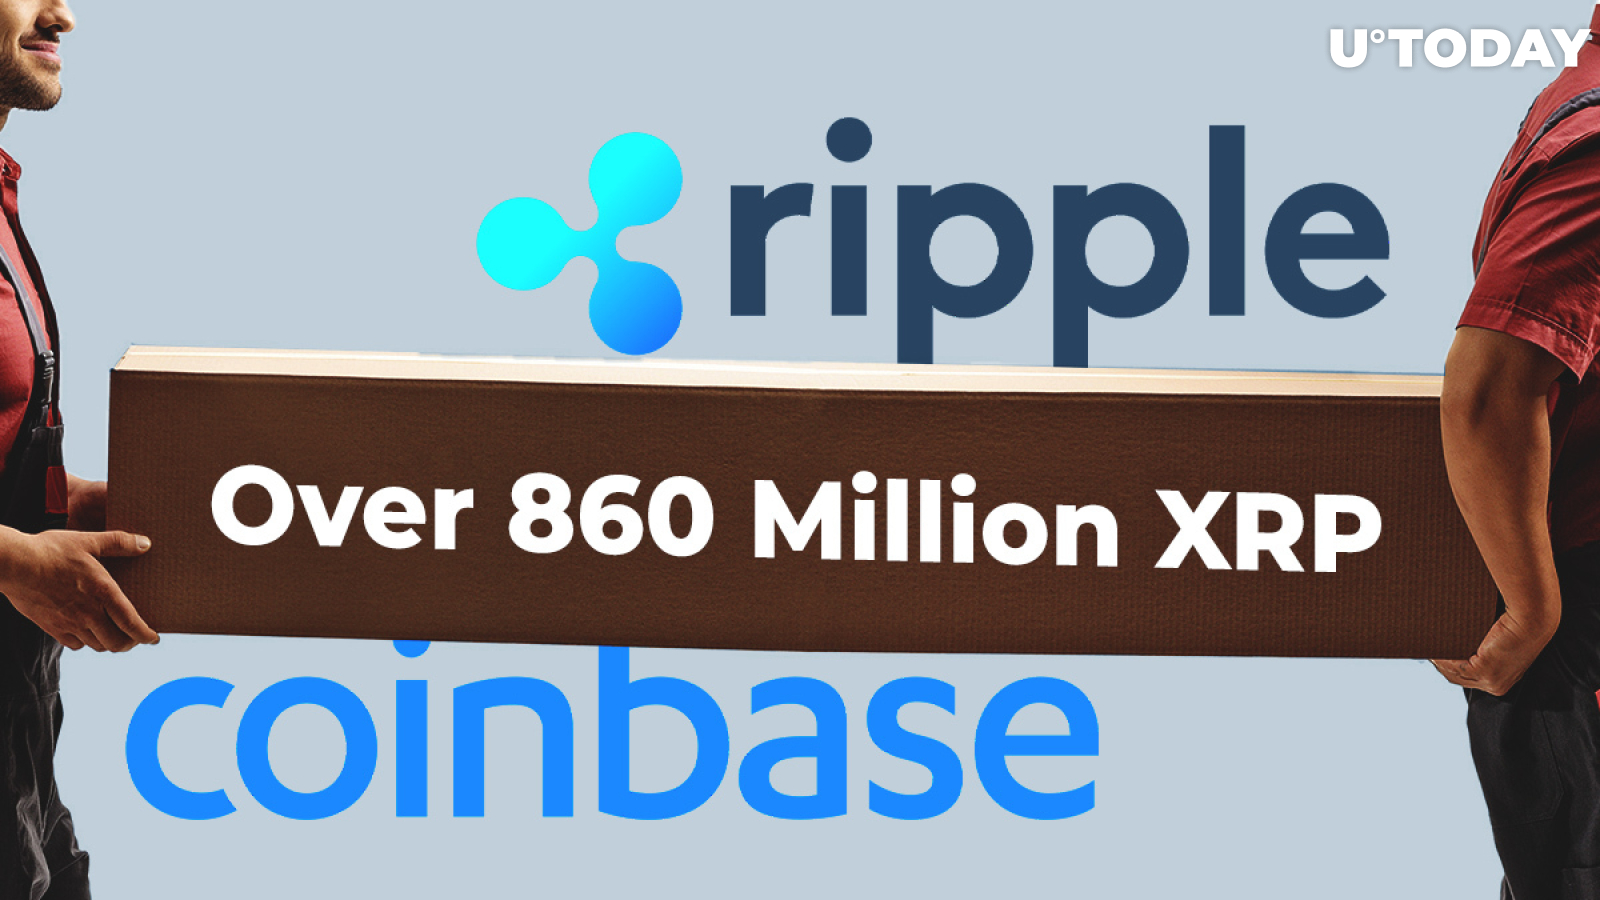 Ripple, Coinbase Move over 860 Million XRP with Other Top Players in Last 15 Hours